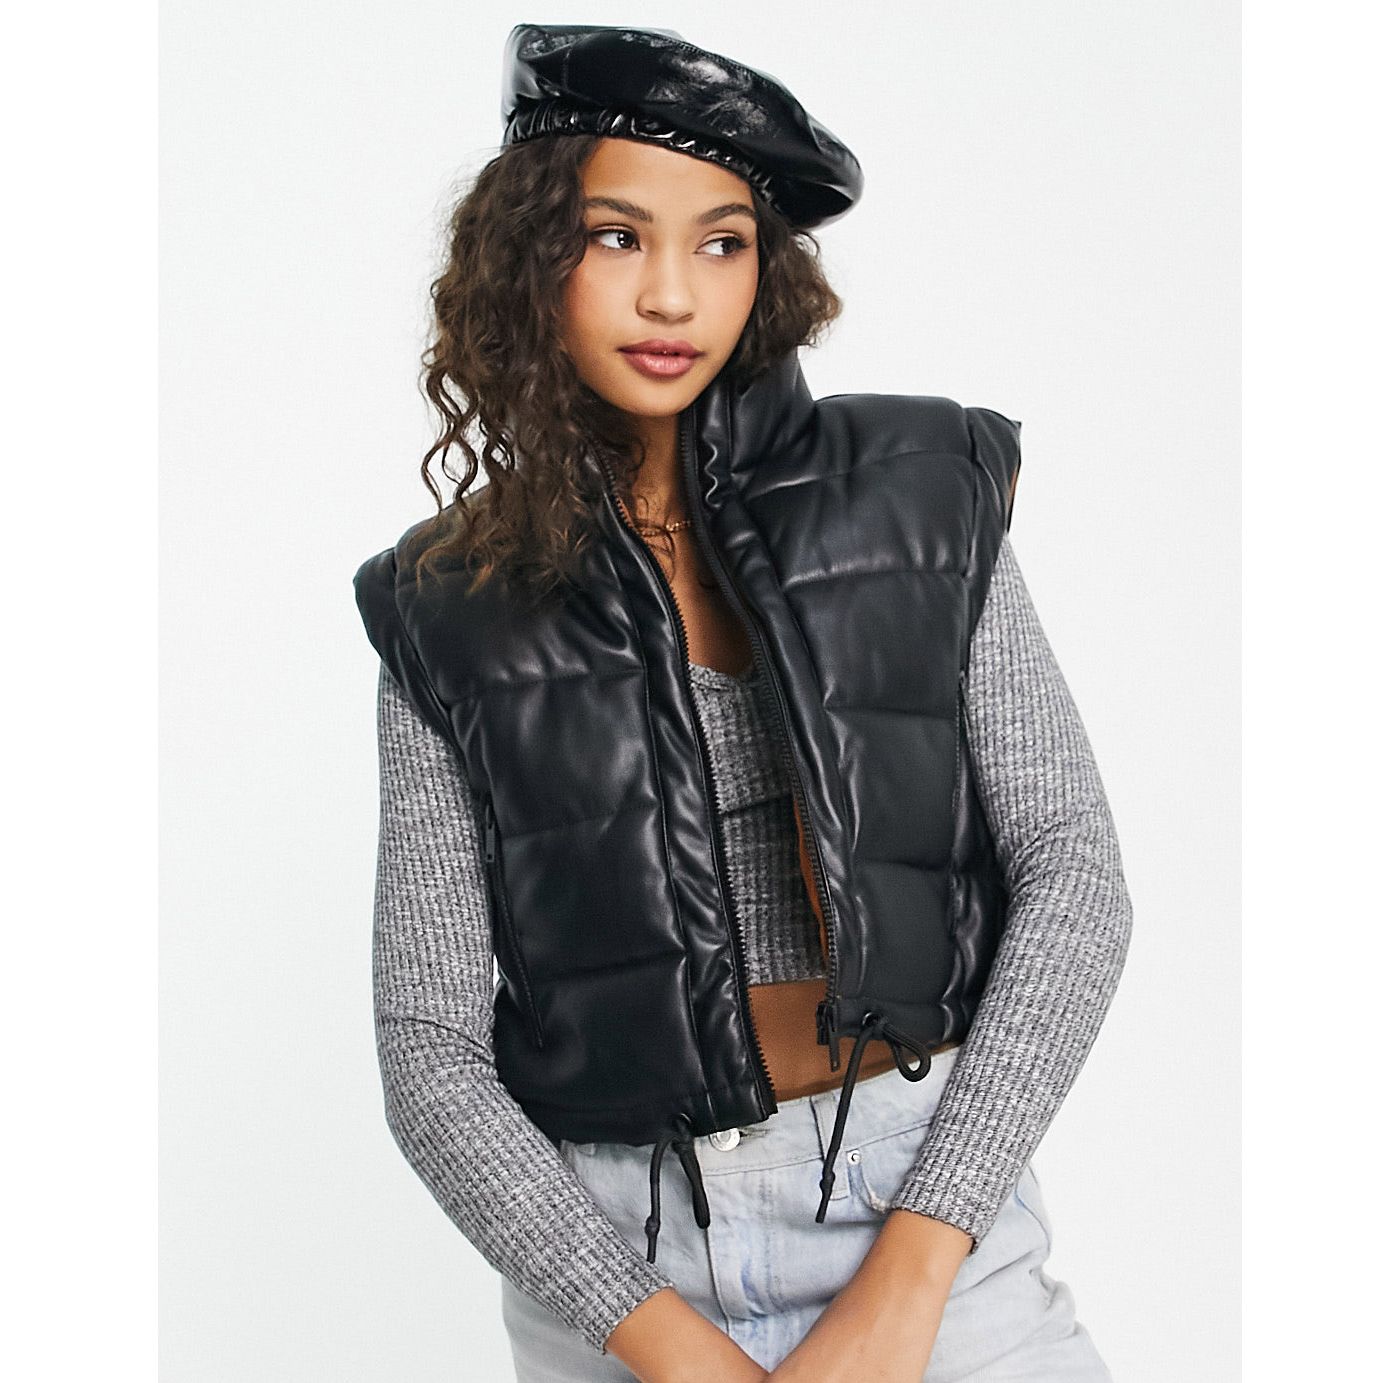 Pimkie faux leather cropped gilet in black